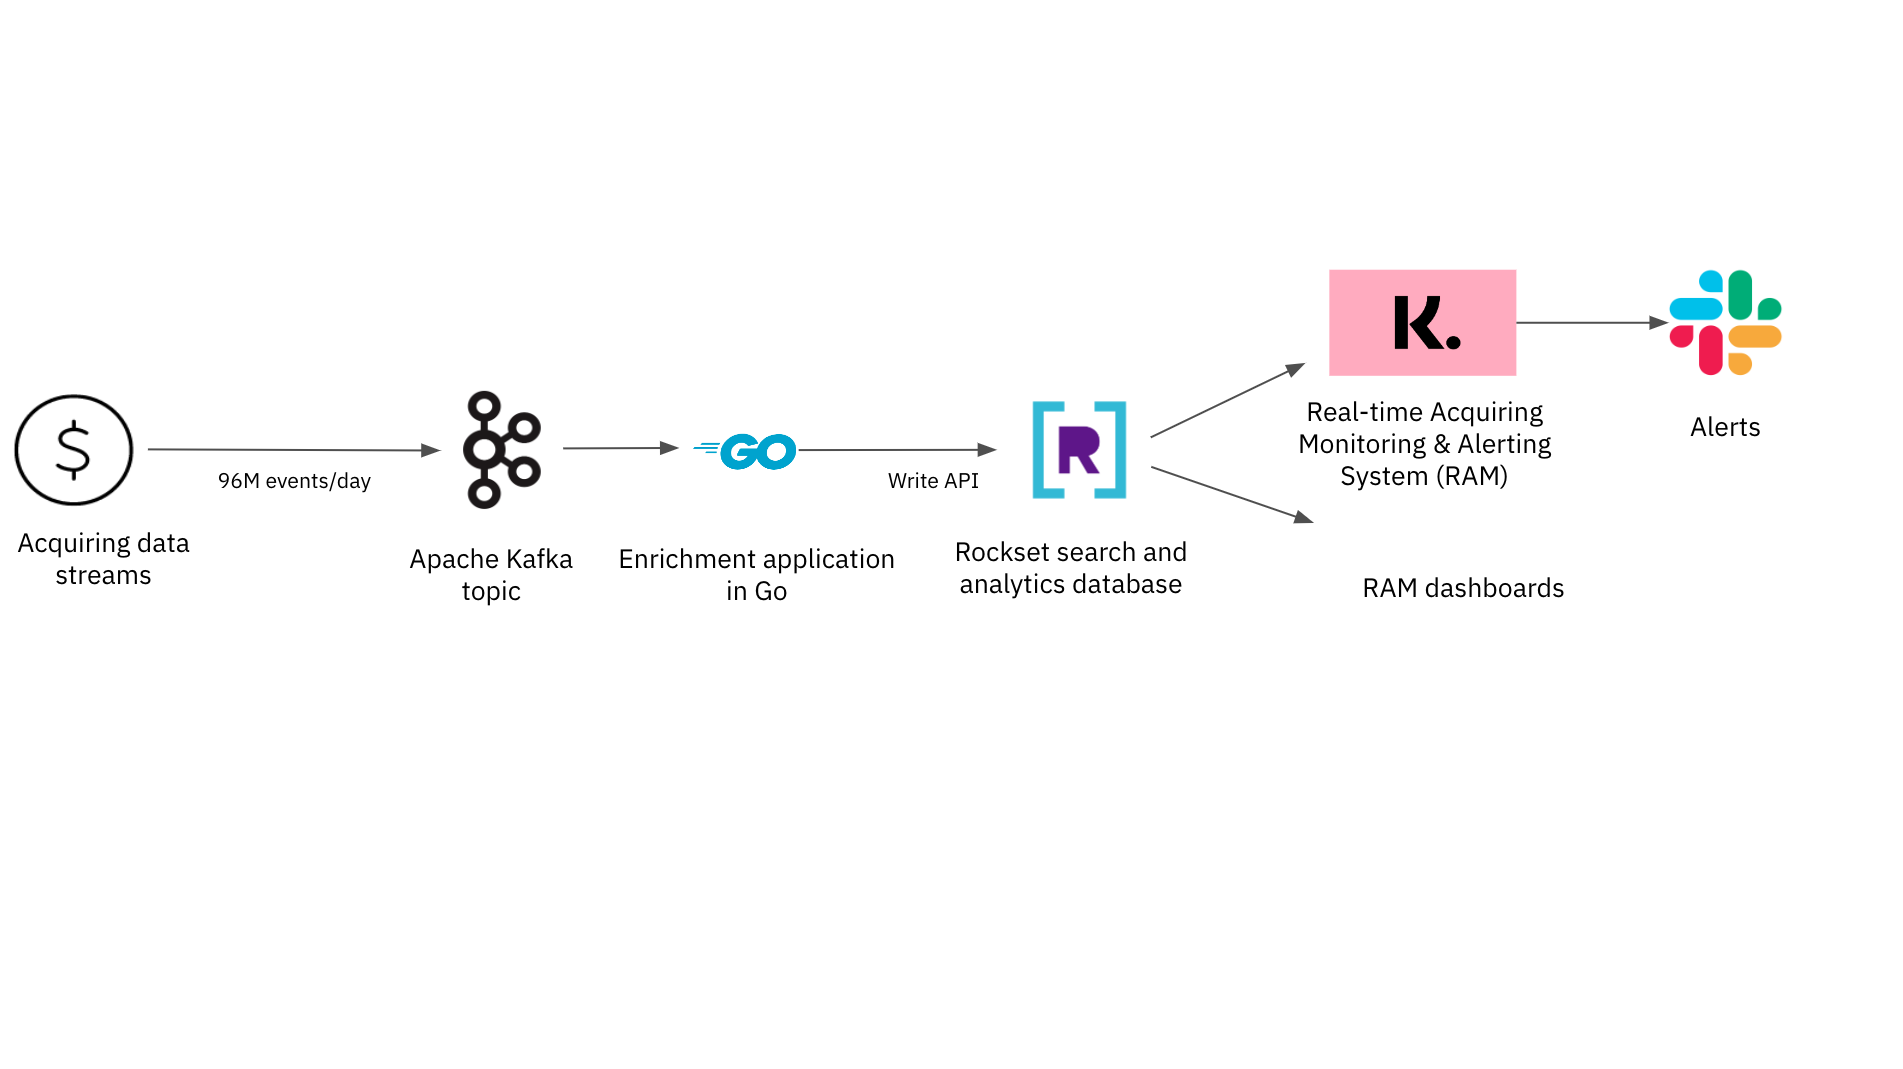 Klarna's architecture for real-time monitoring and alerting